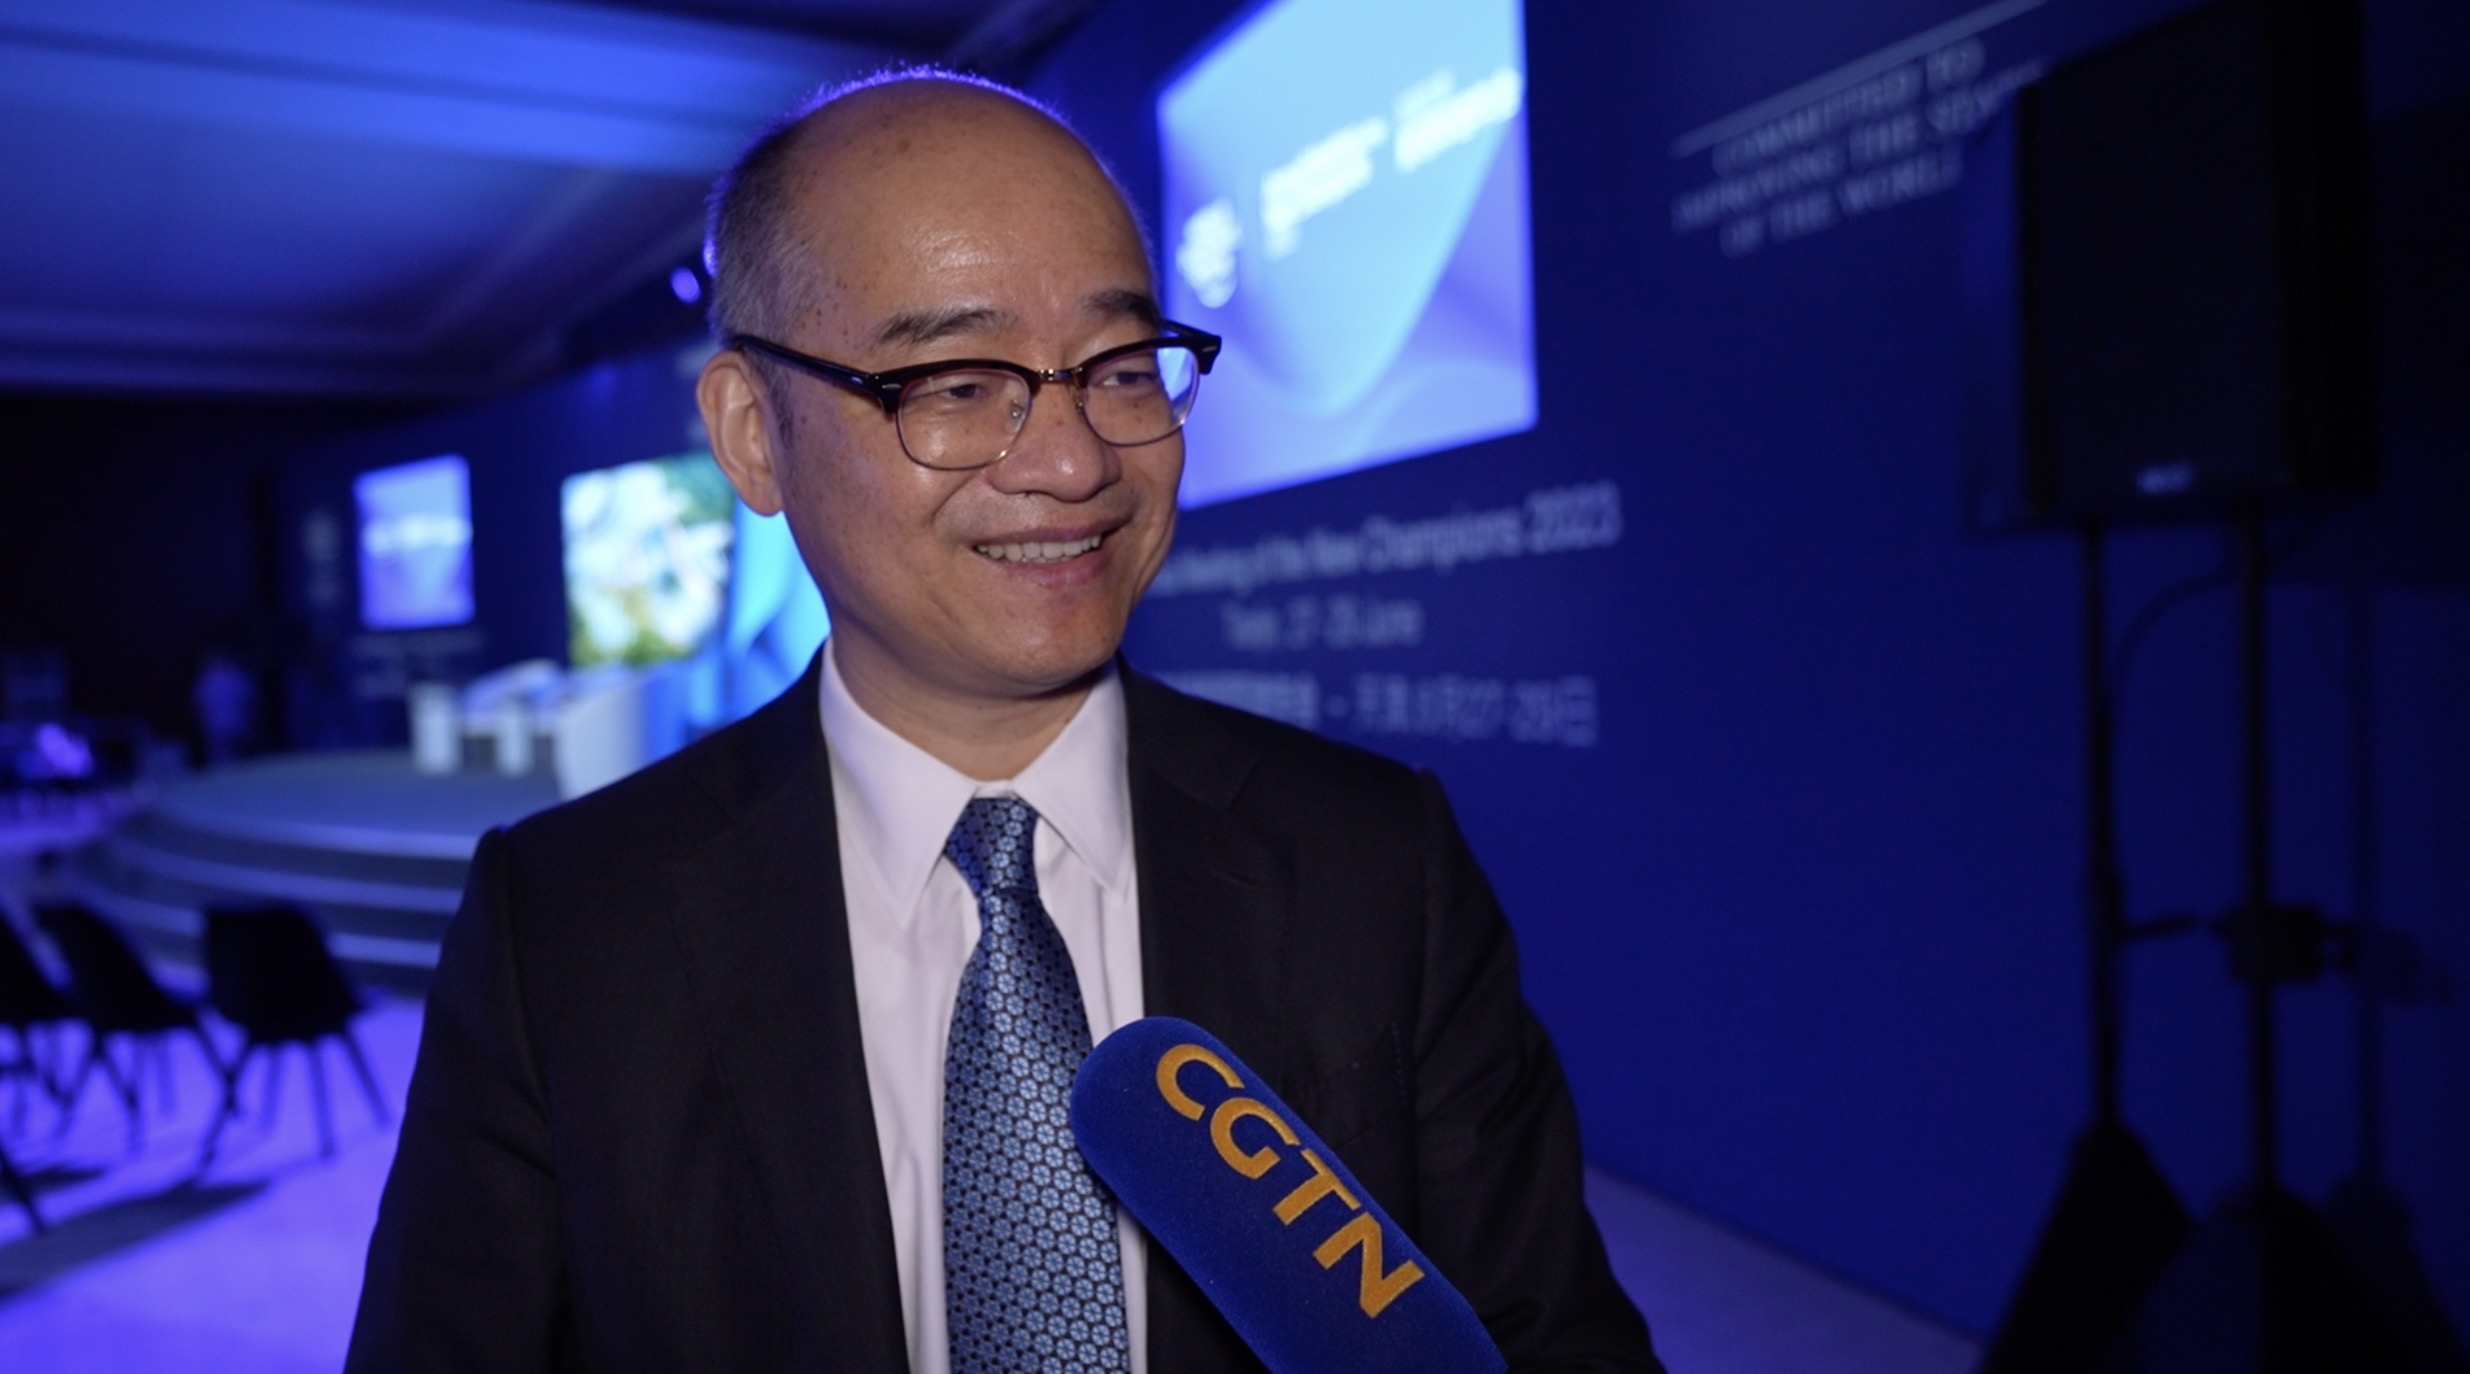 William Yu, president of Honeywell China, is interviewed after the subforum themed 